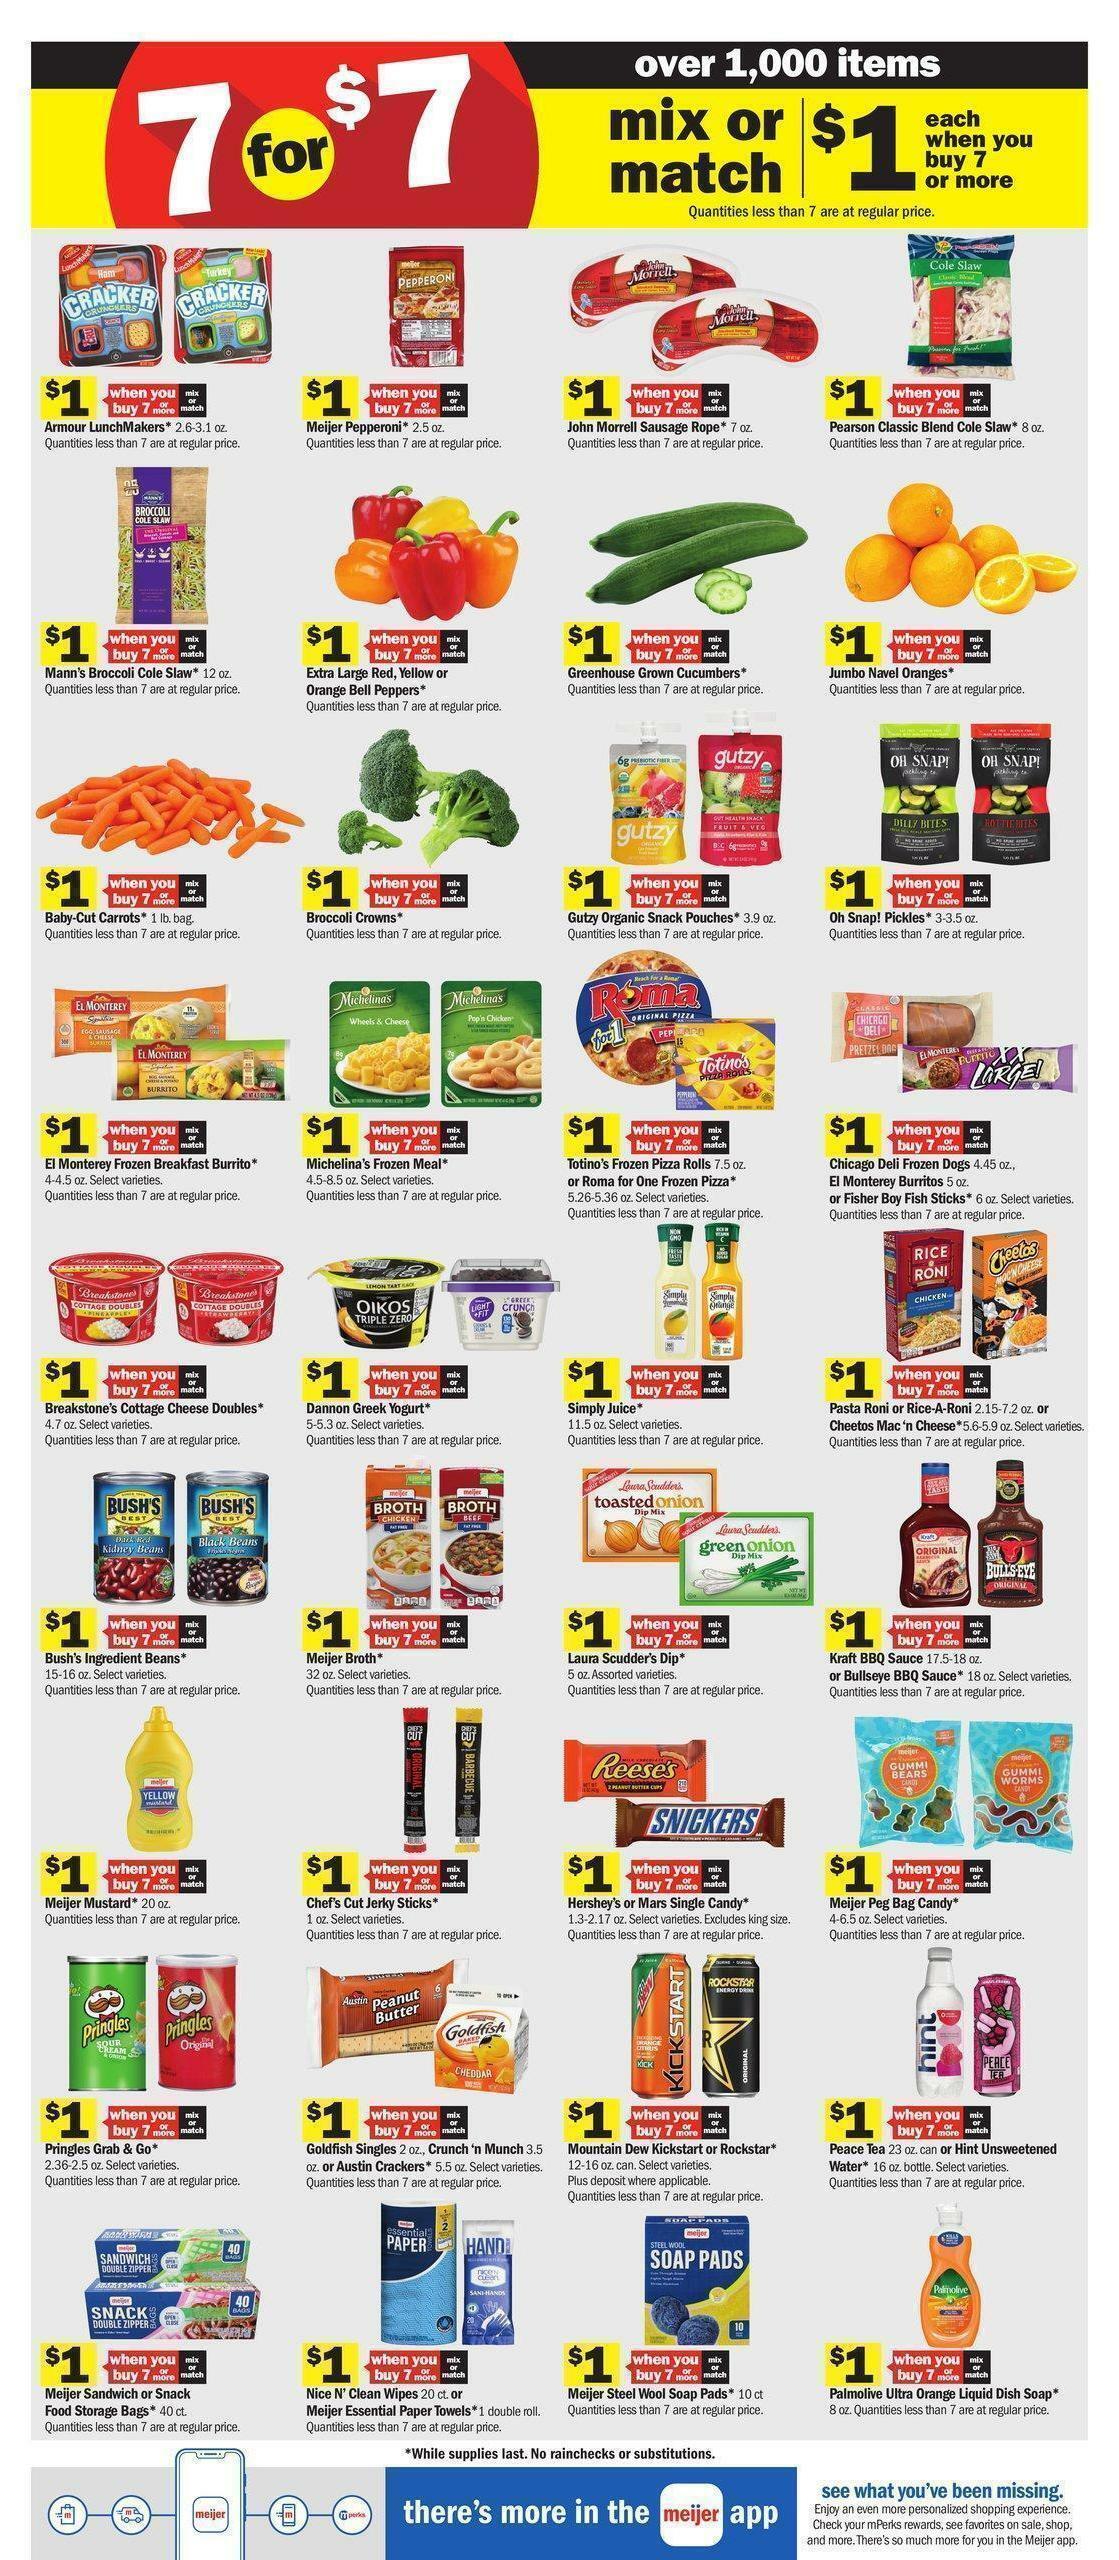 Meijer Weekly Ad from August 7